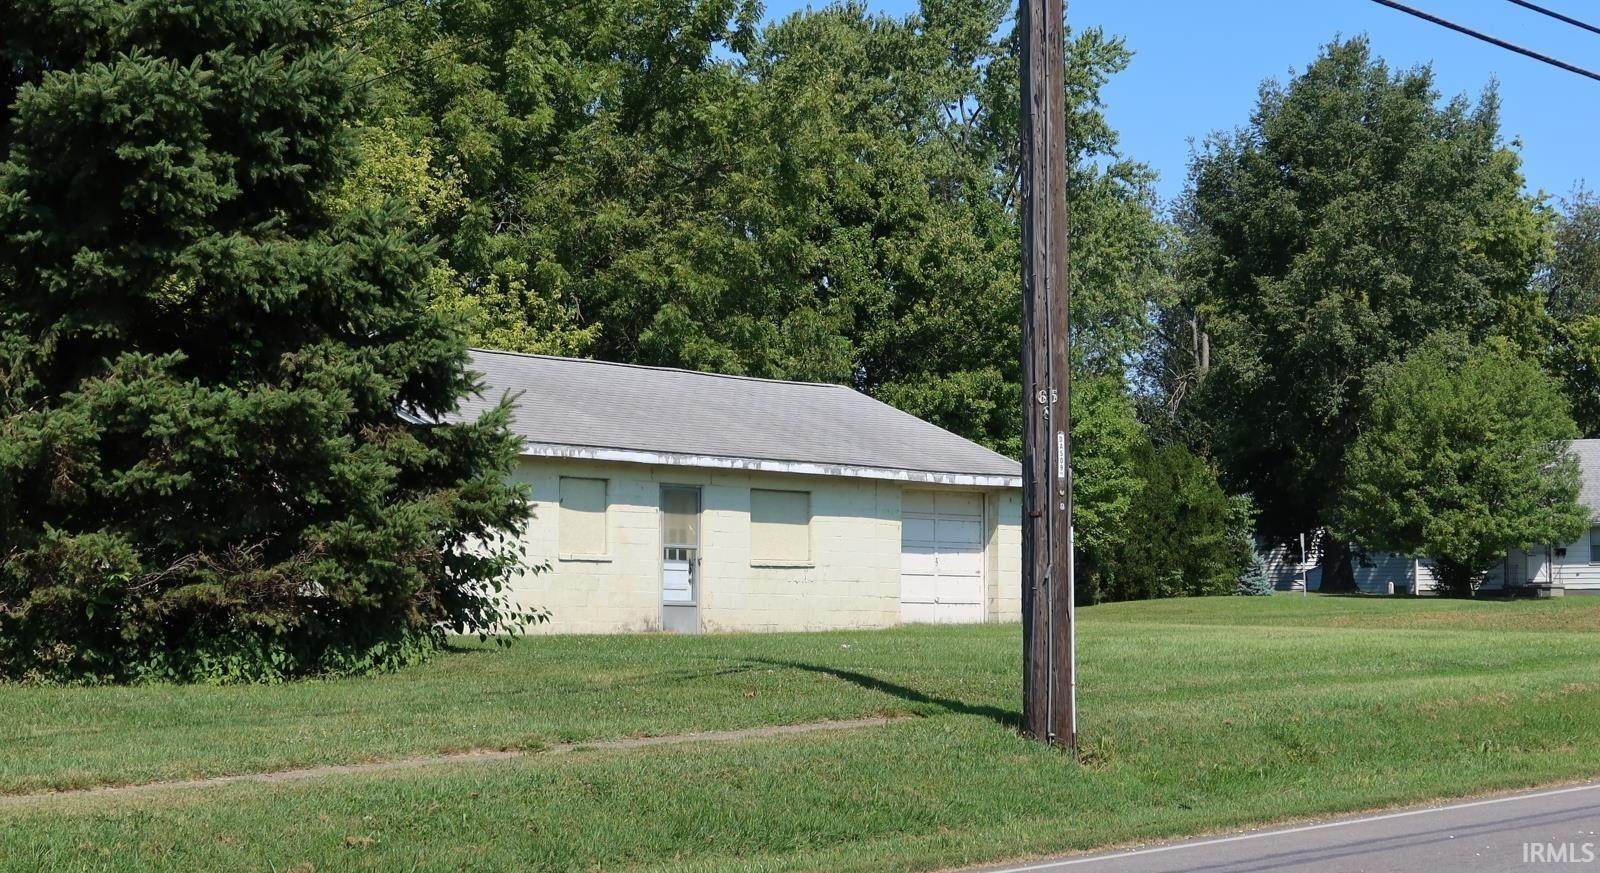 Single Family Homes for Sale at 1209 N Main Street Mount Vernon, Indiana 47620 United States